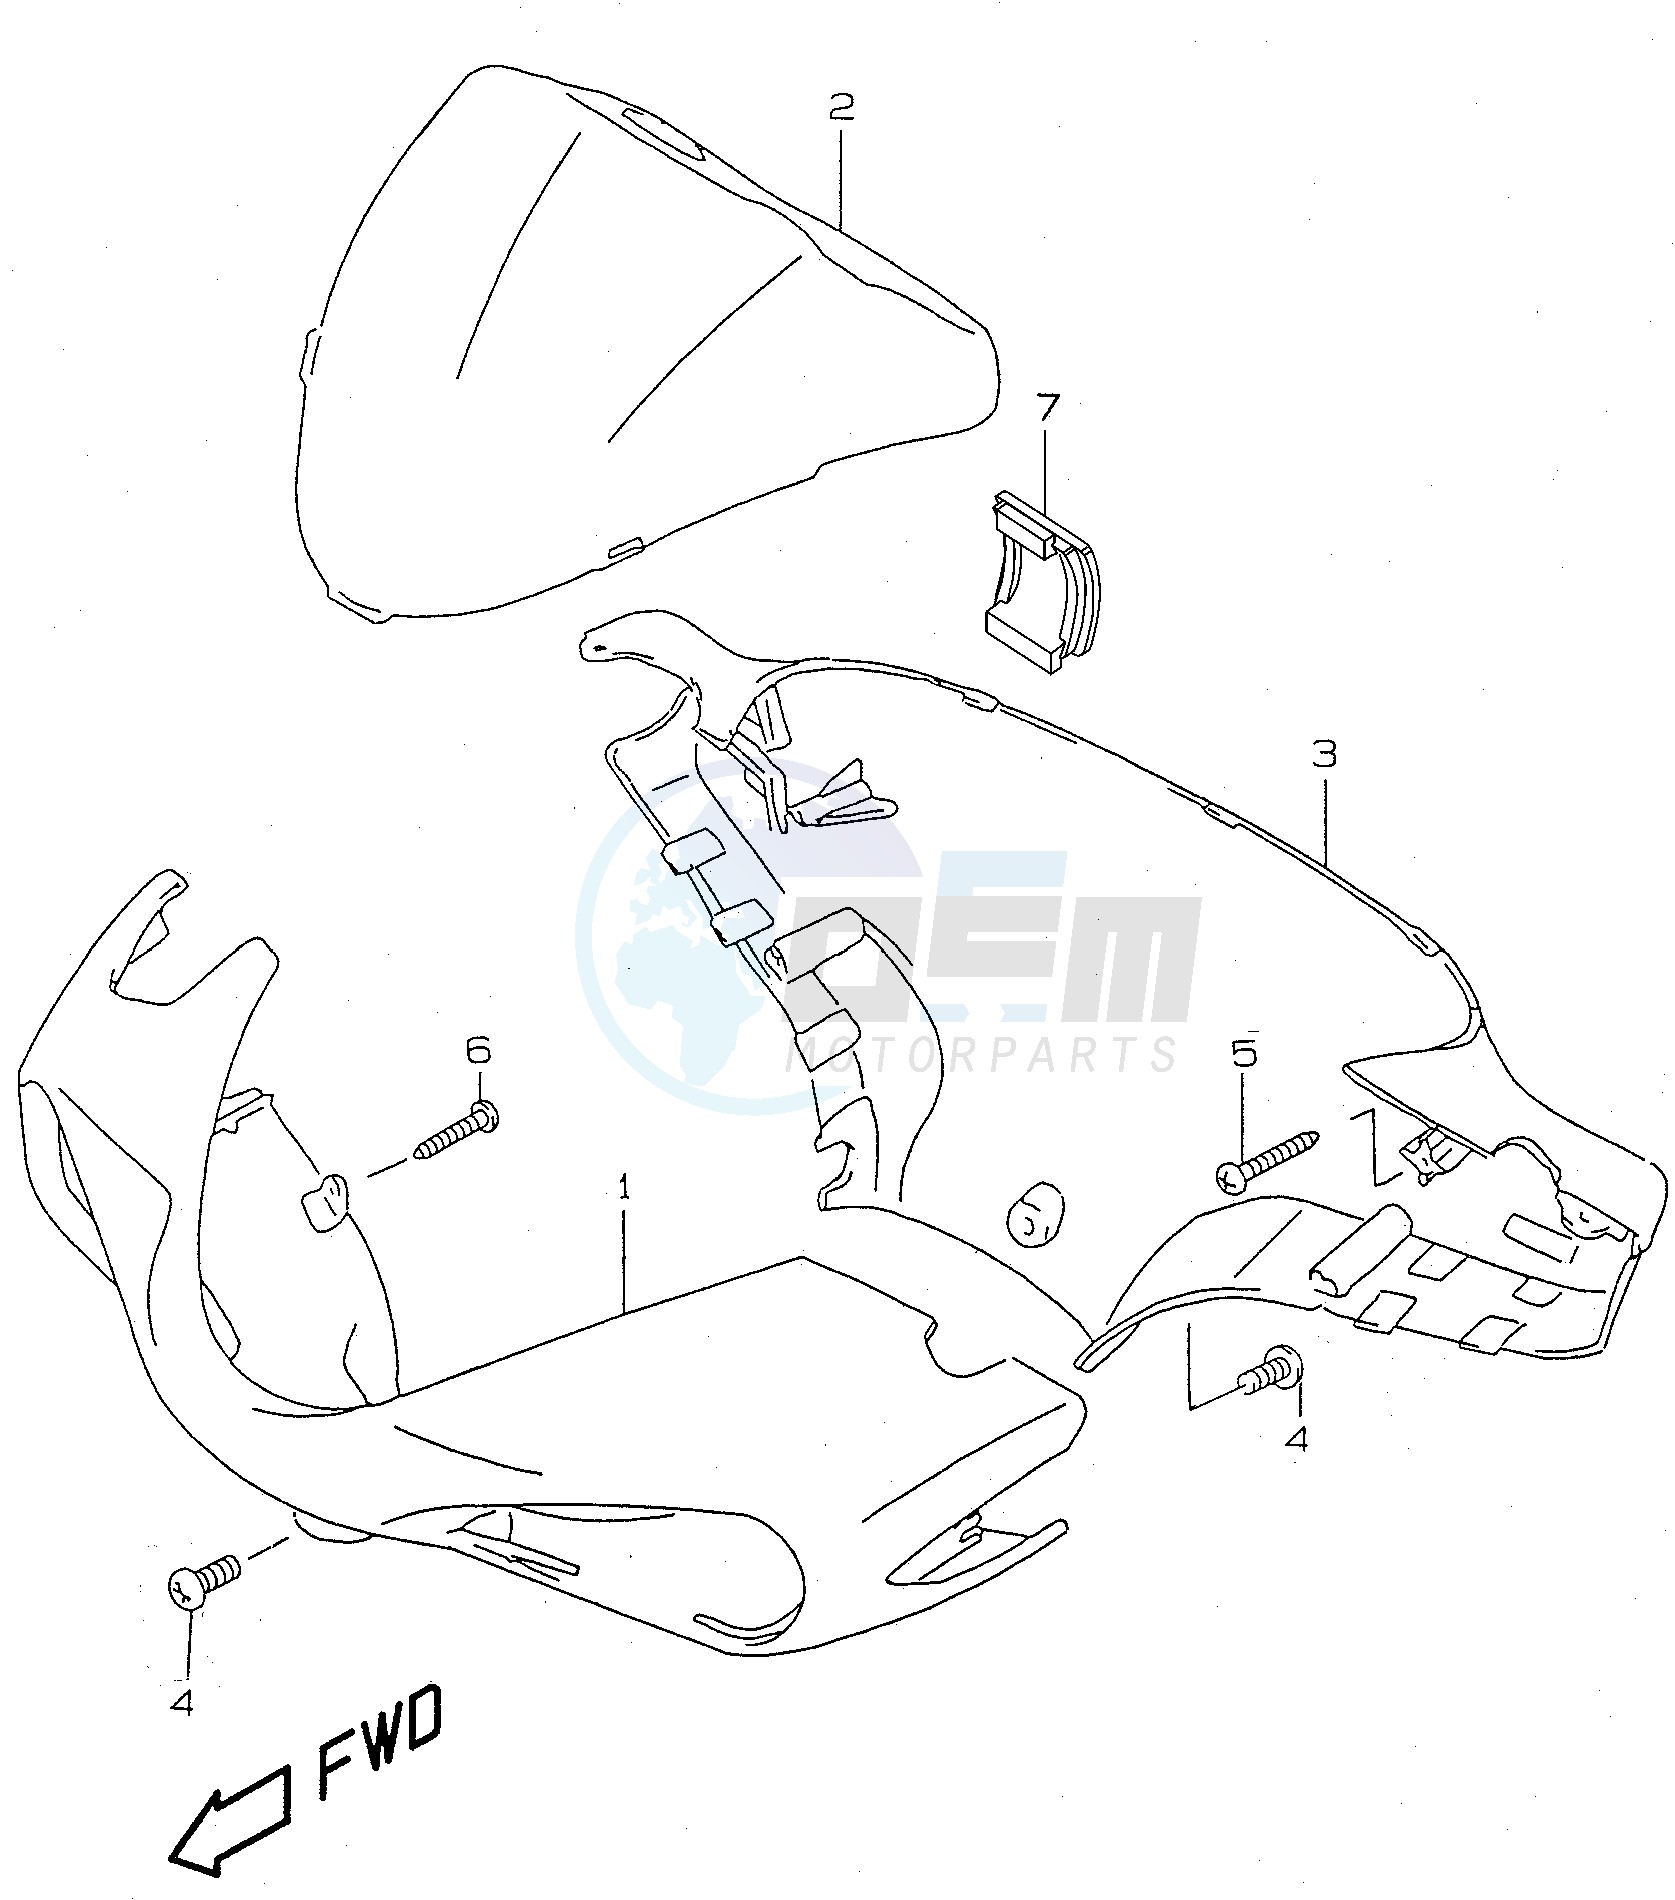 HANDLE COVER (model V W and model AY50 X) blueprint